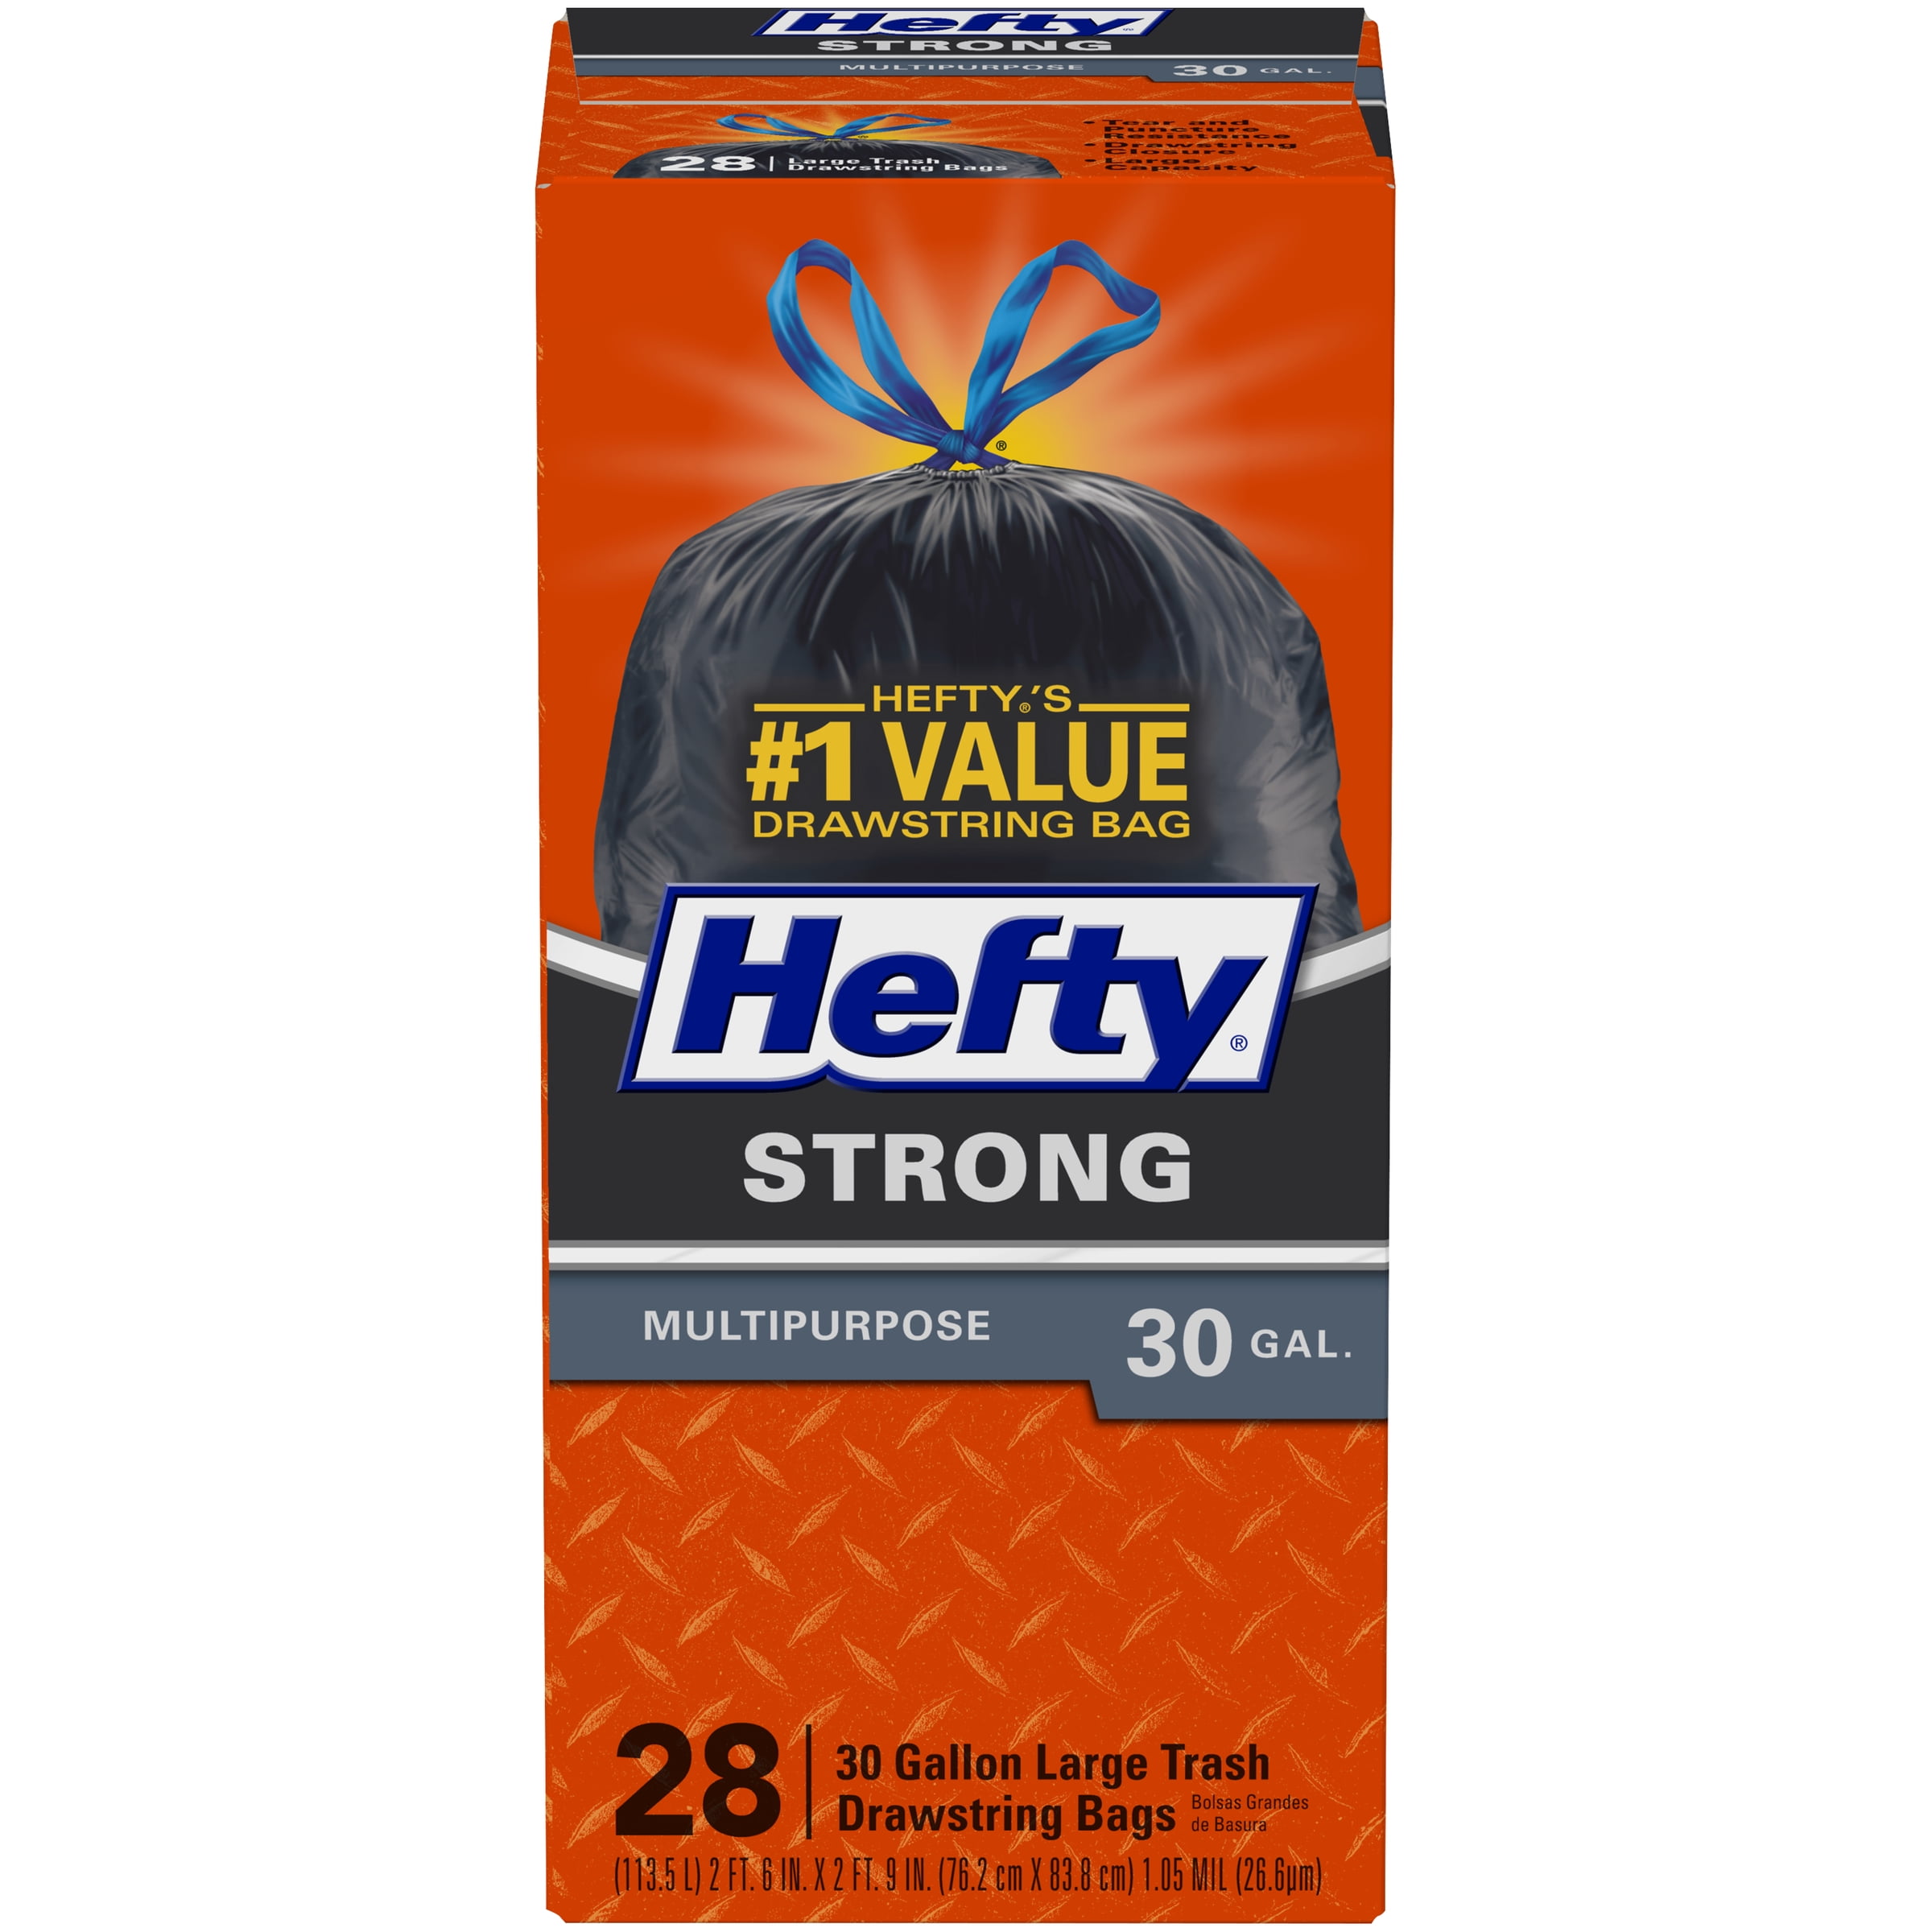 Hefty Strong Large Trash Lawn and Leaf, Drawstring, 39 Gallon Garbage Bags 